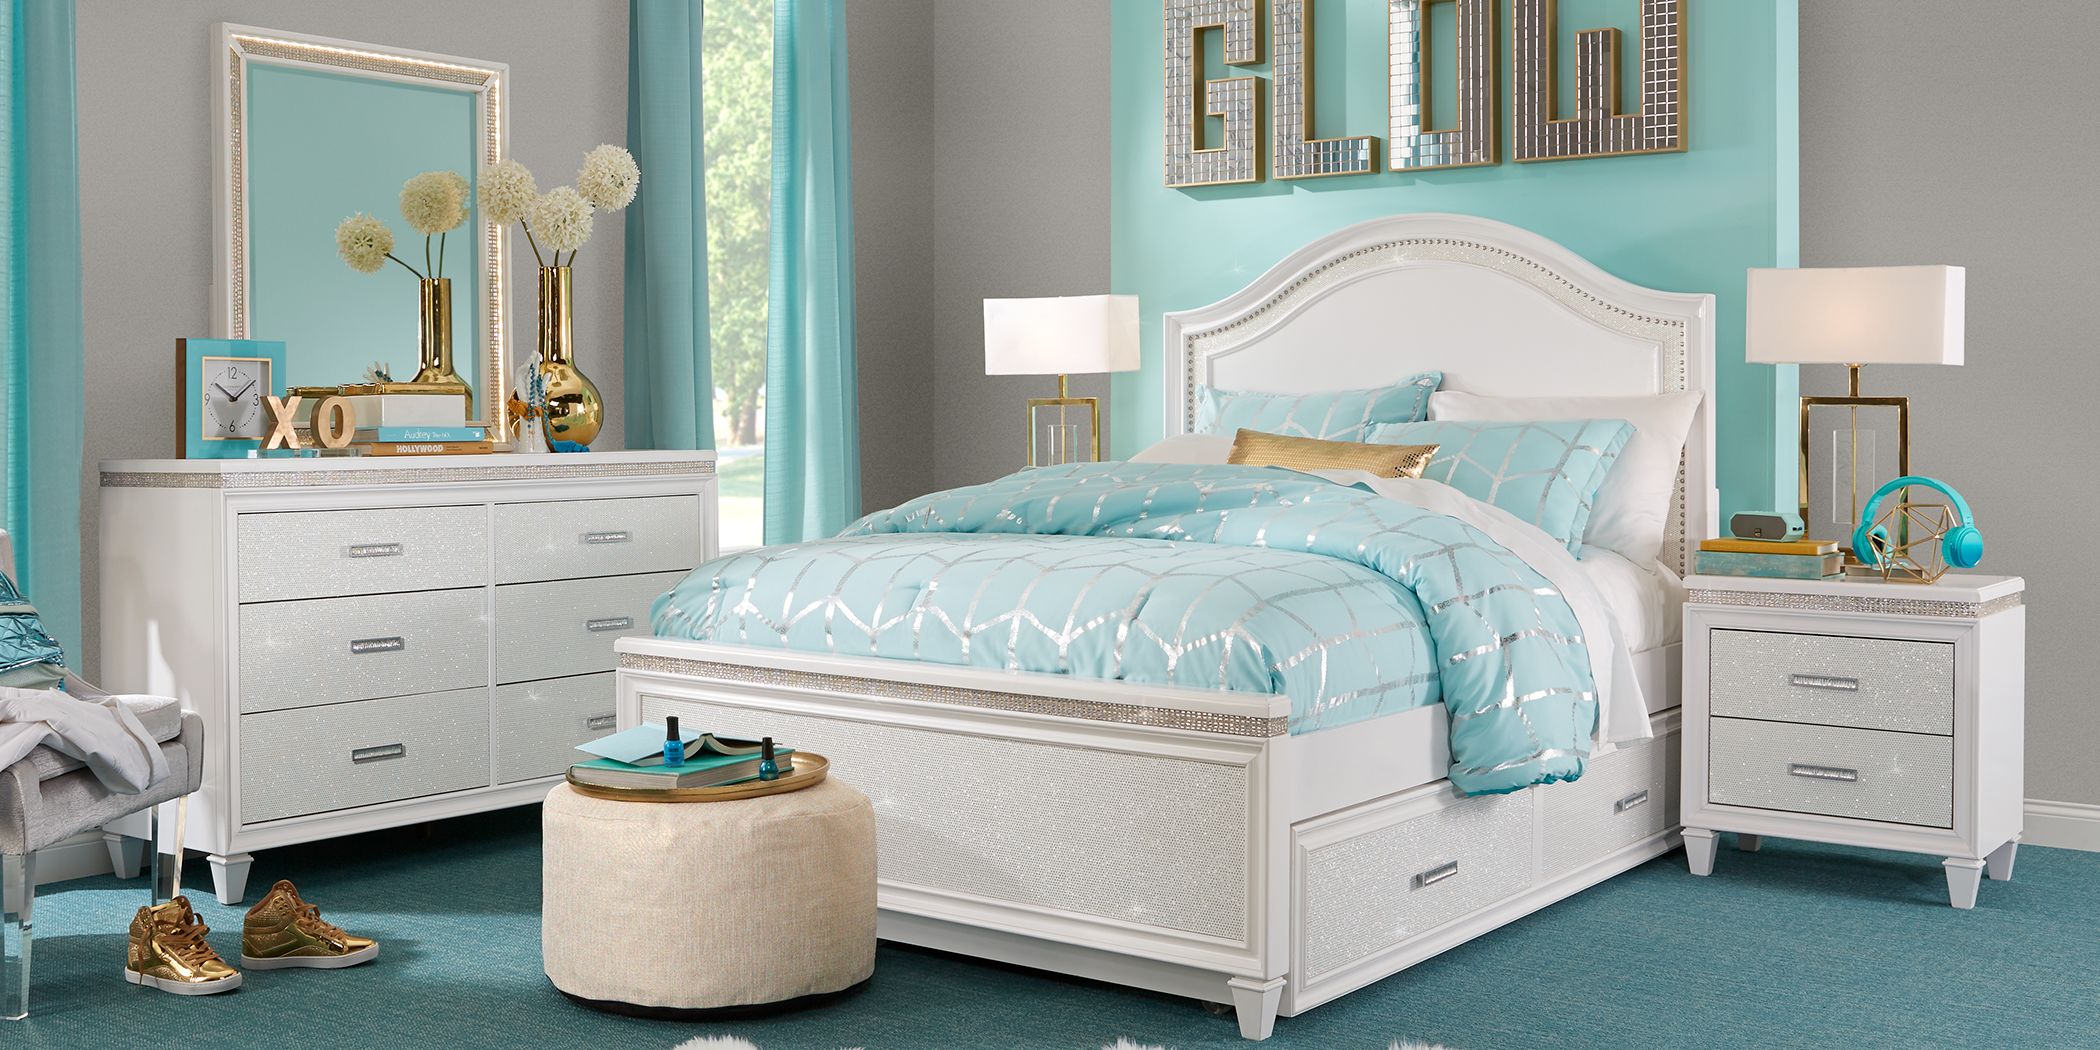 Childrens Bedroom Furniture Sets Cheaper Than Retail Price Buy Clothing Accessories And Lifestyle Products For Women Men